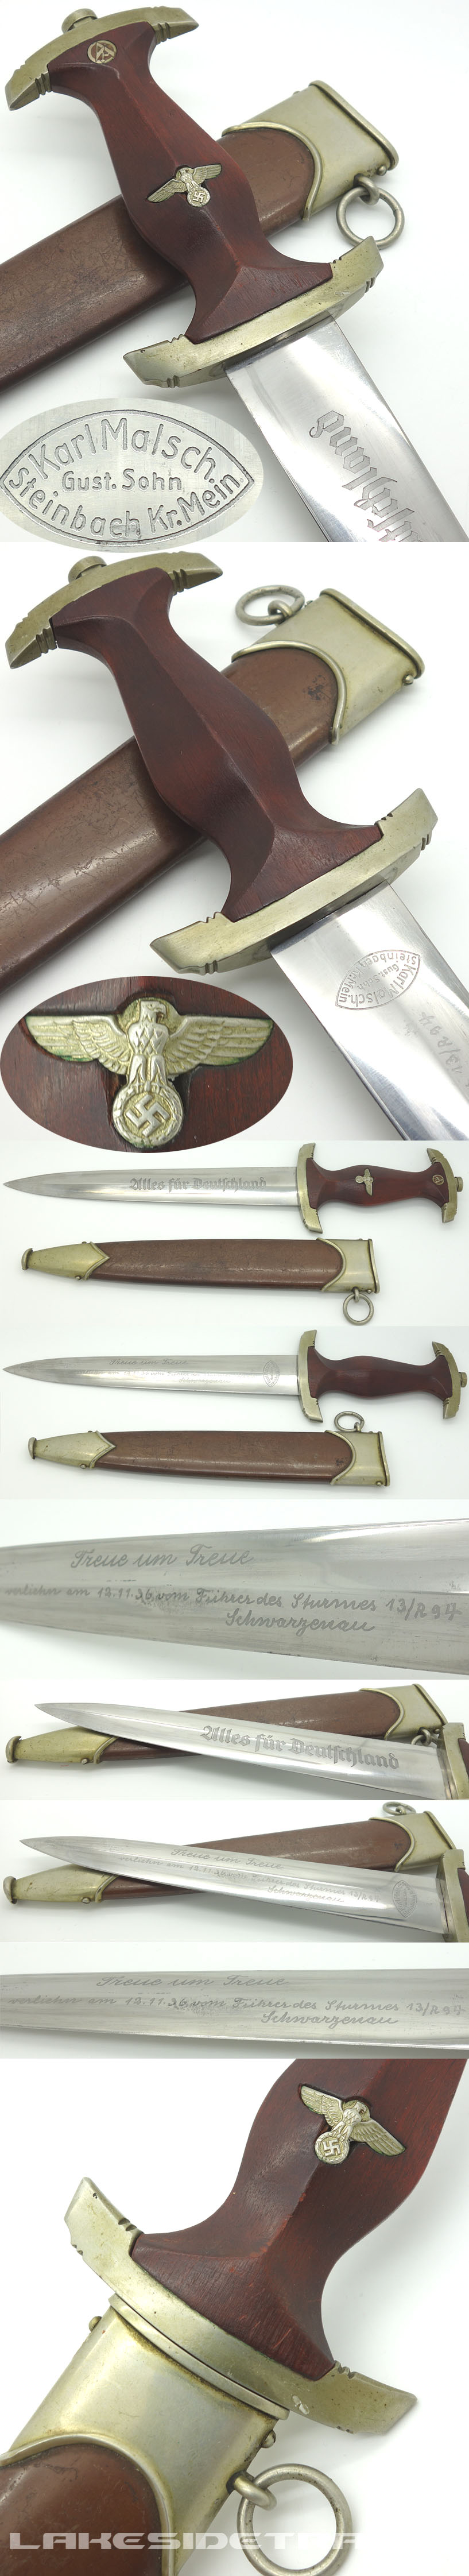 Early Personalized SA Dagger by Karl Malsch